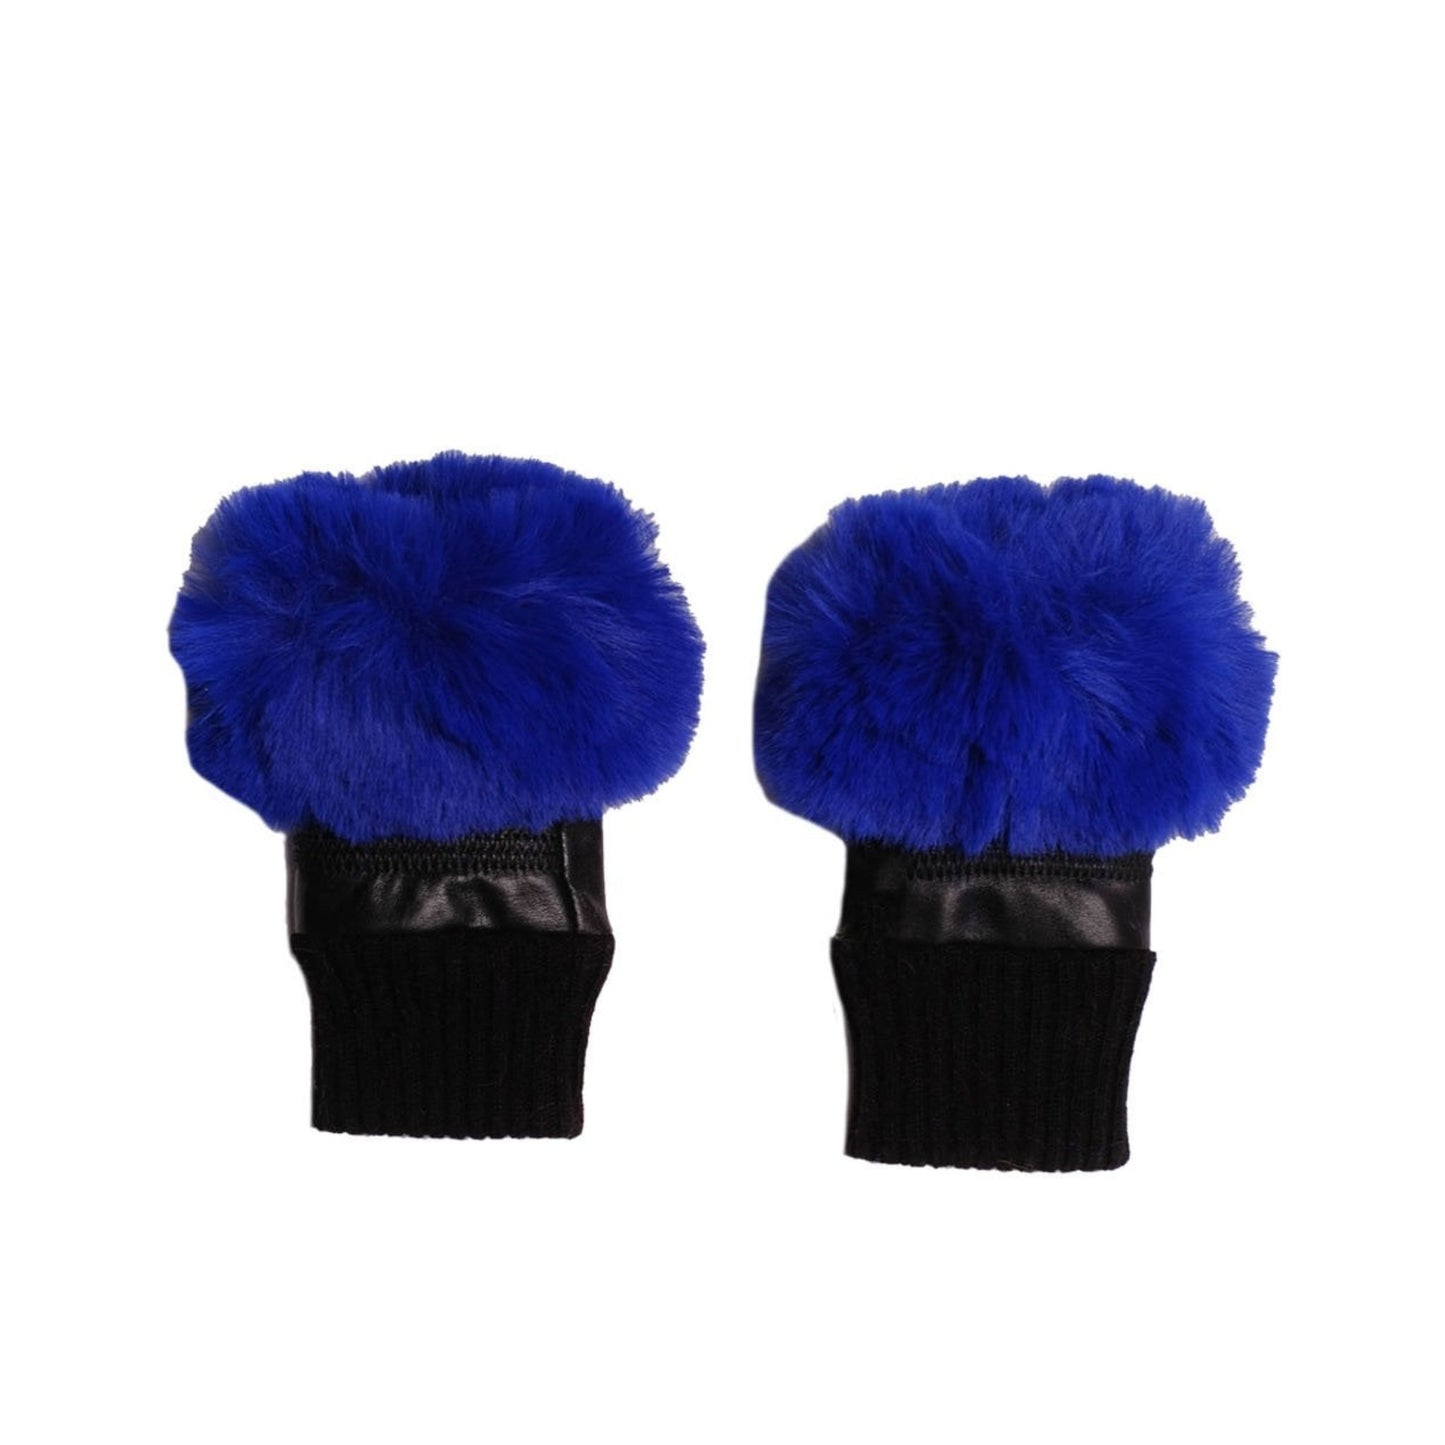 Blue Fingerless Leather Gloves - Something about Sofia